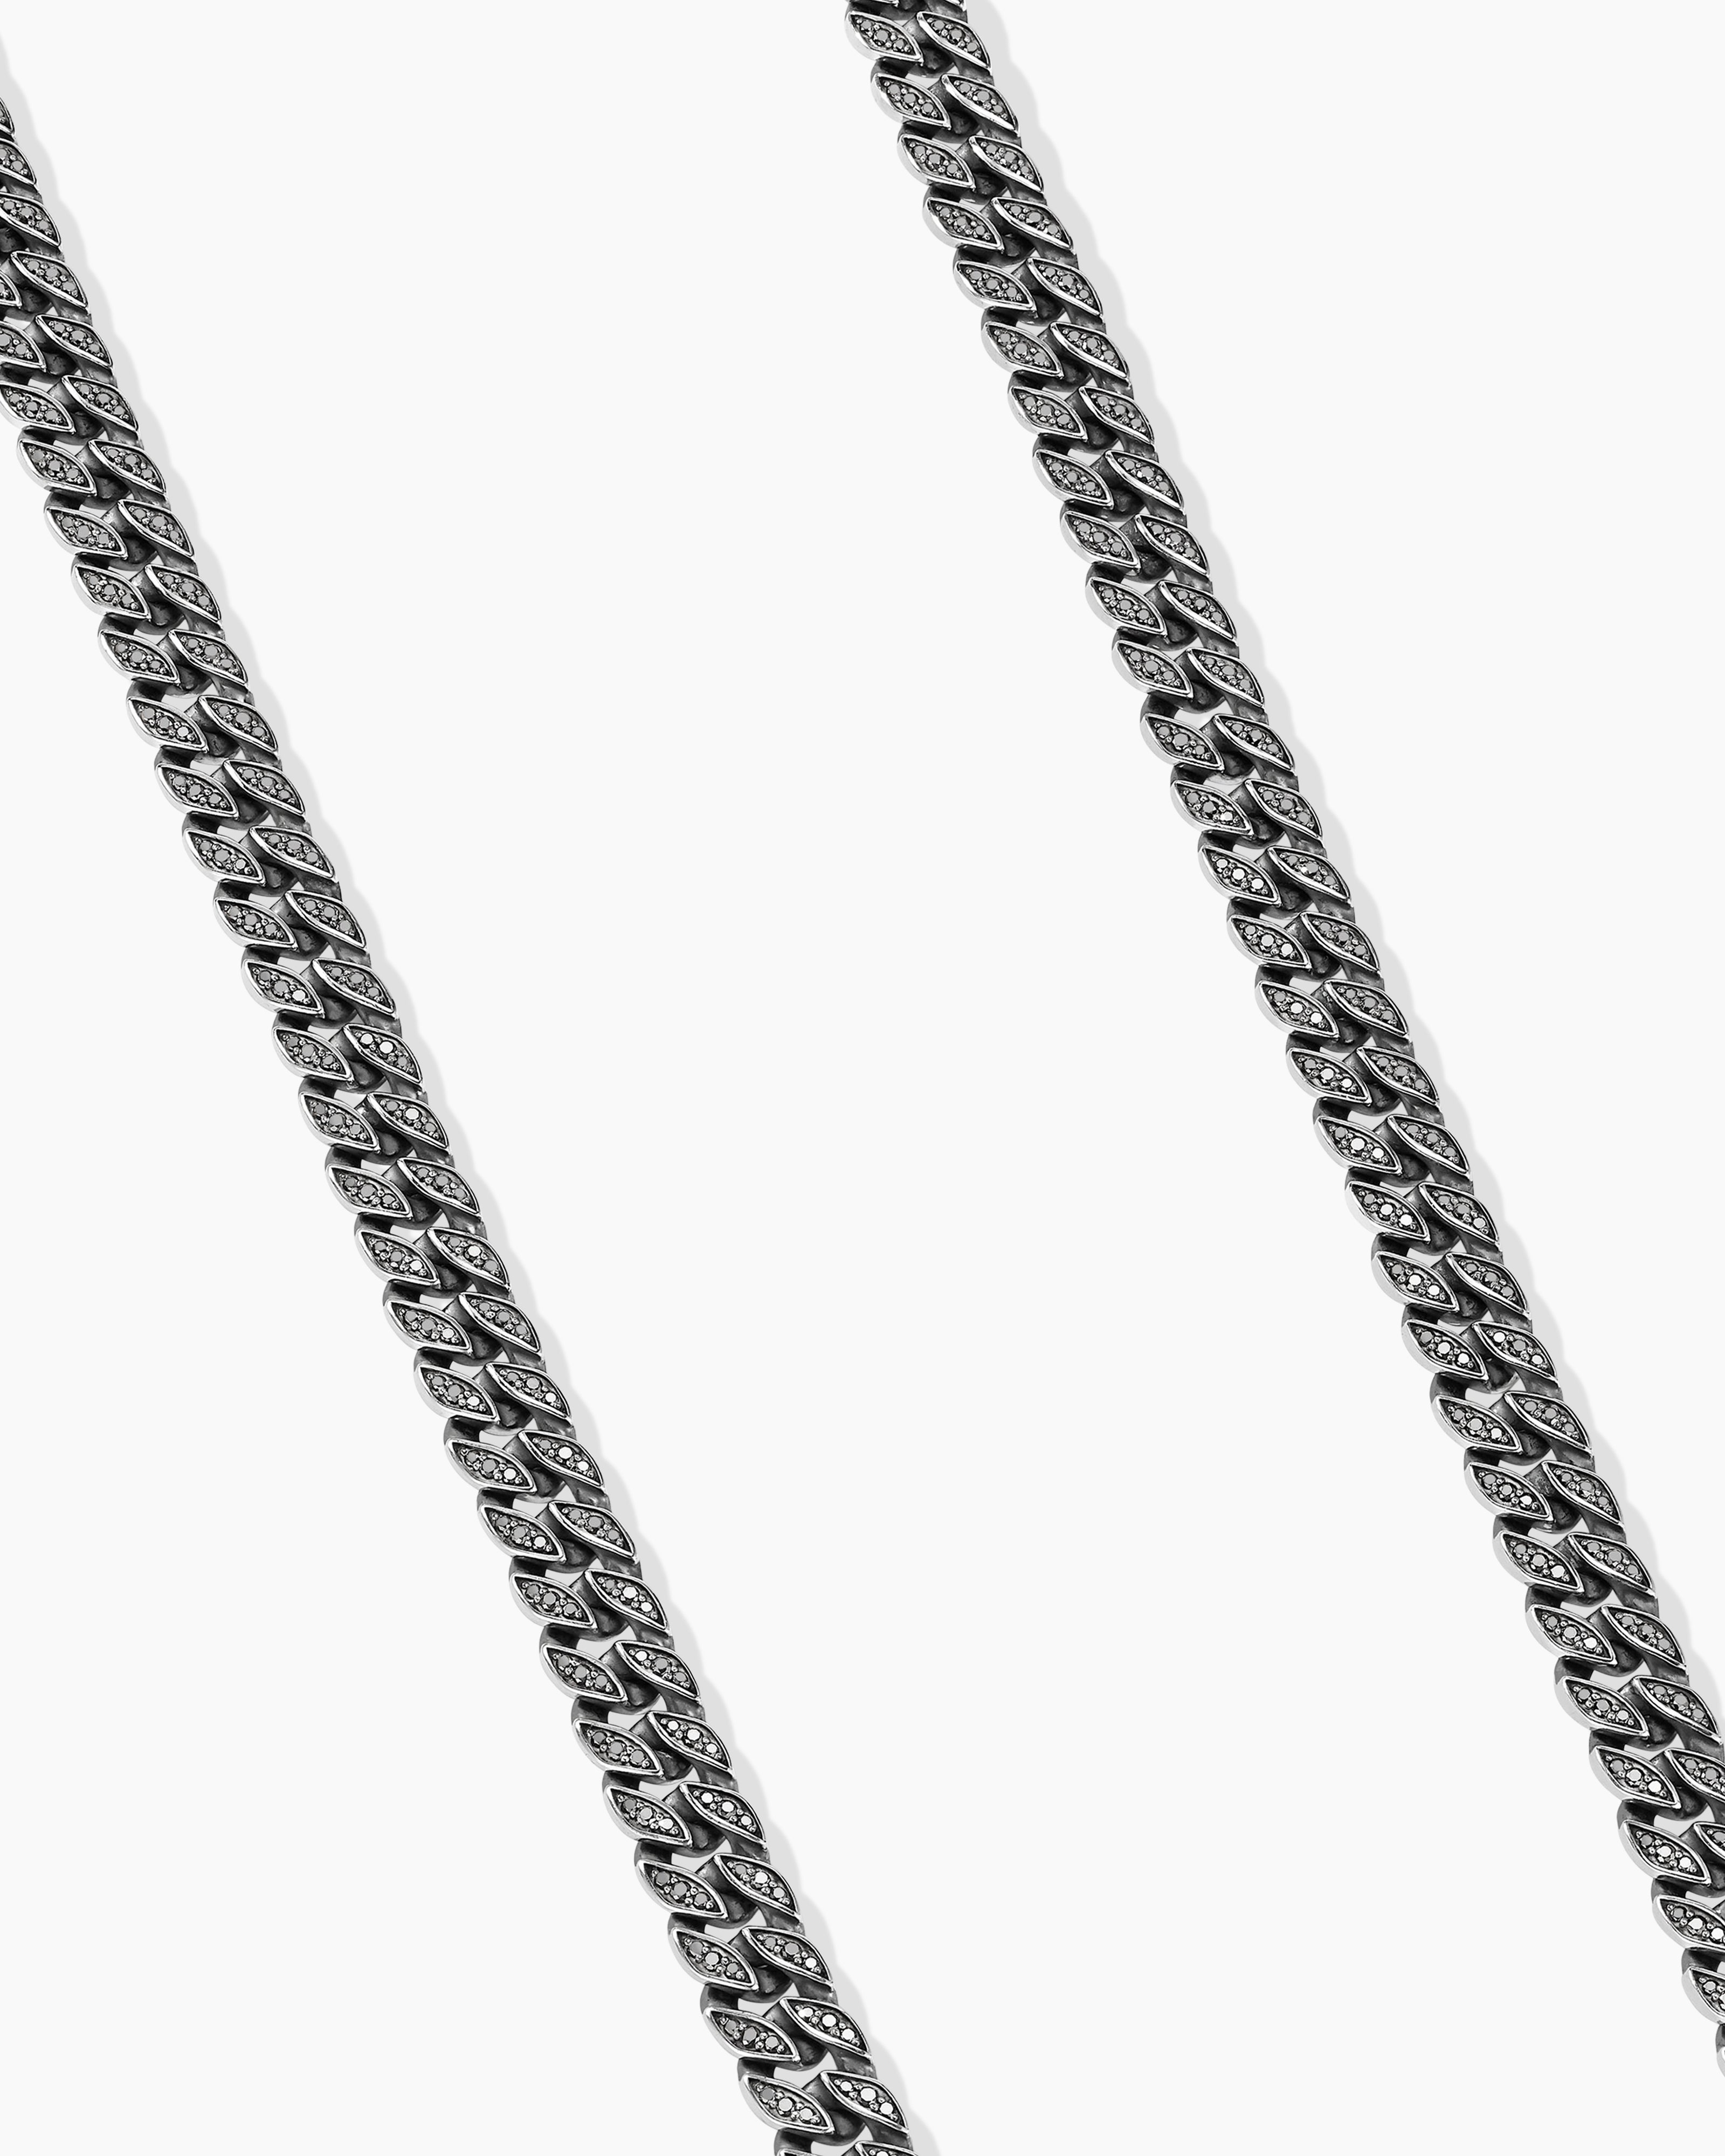 Mens Curb Chain Necklace in Sterling Silver, 8mm | David Yurman